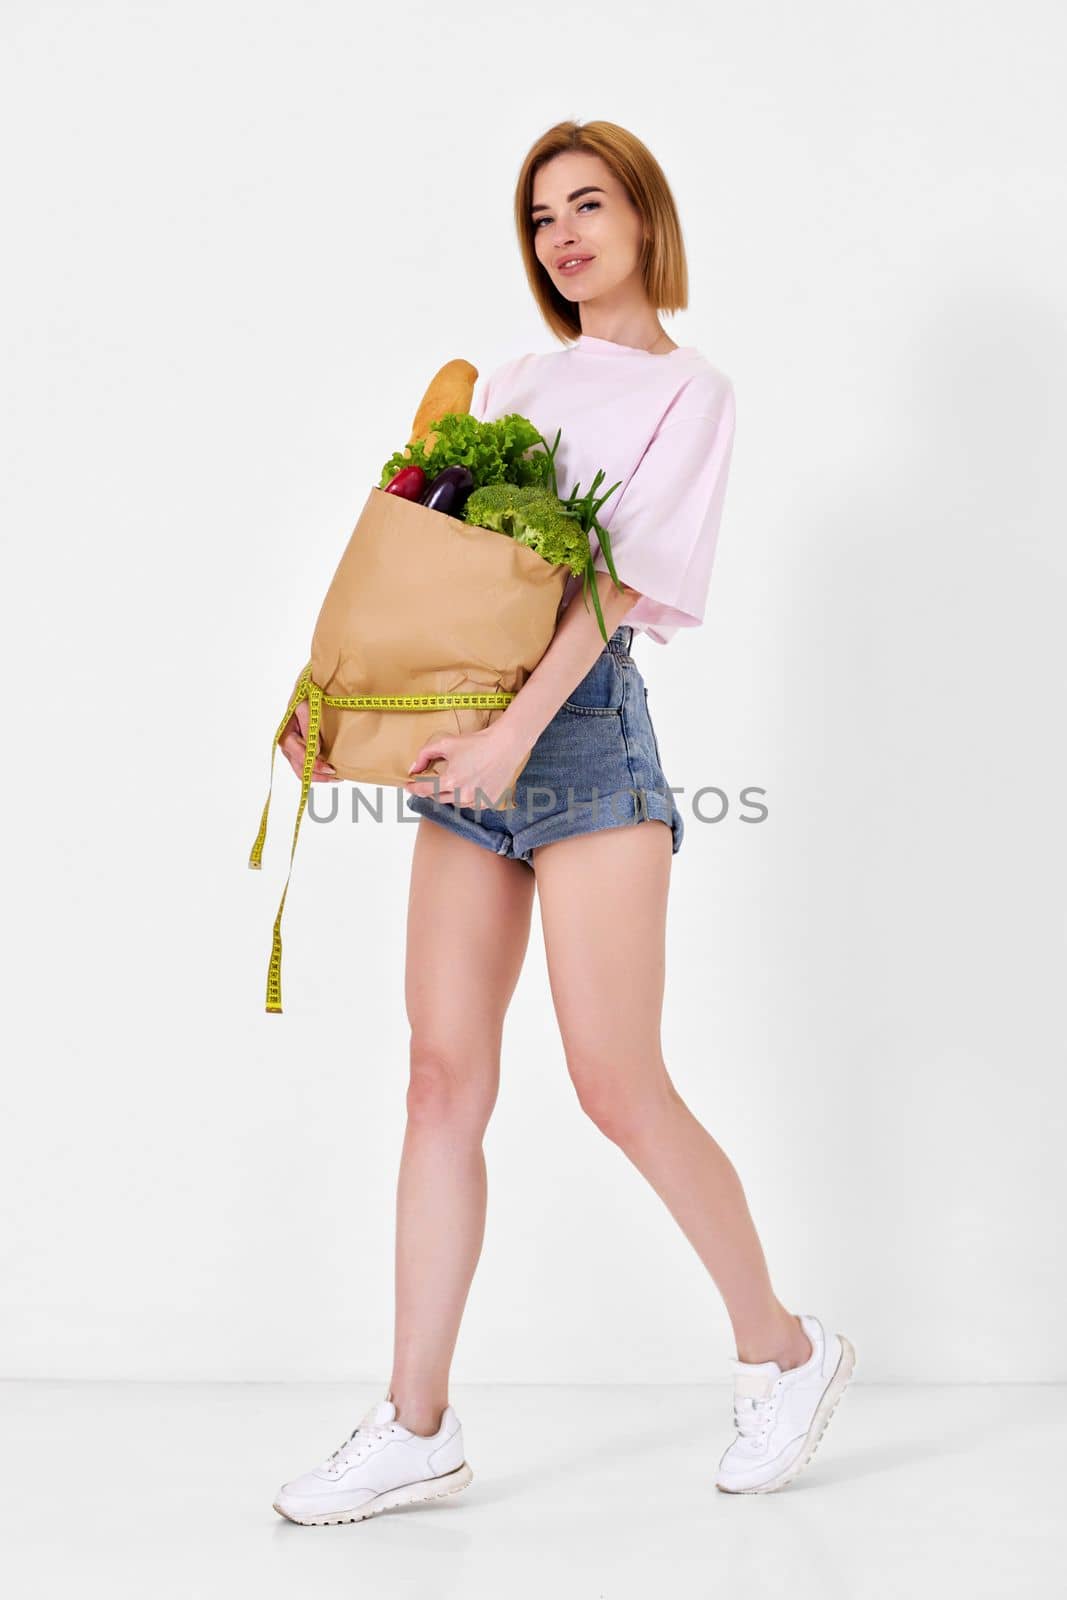 young sporty woman holding a shopping bag full of groceries and measuring tape. healthy food for diet. full length